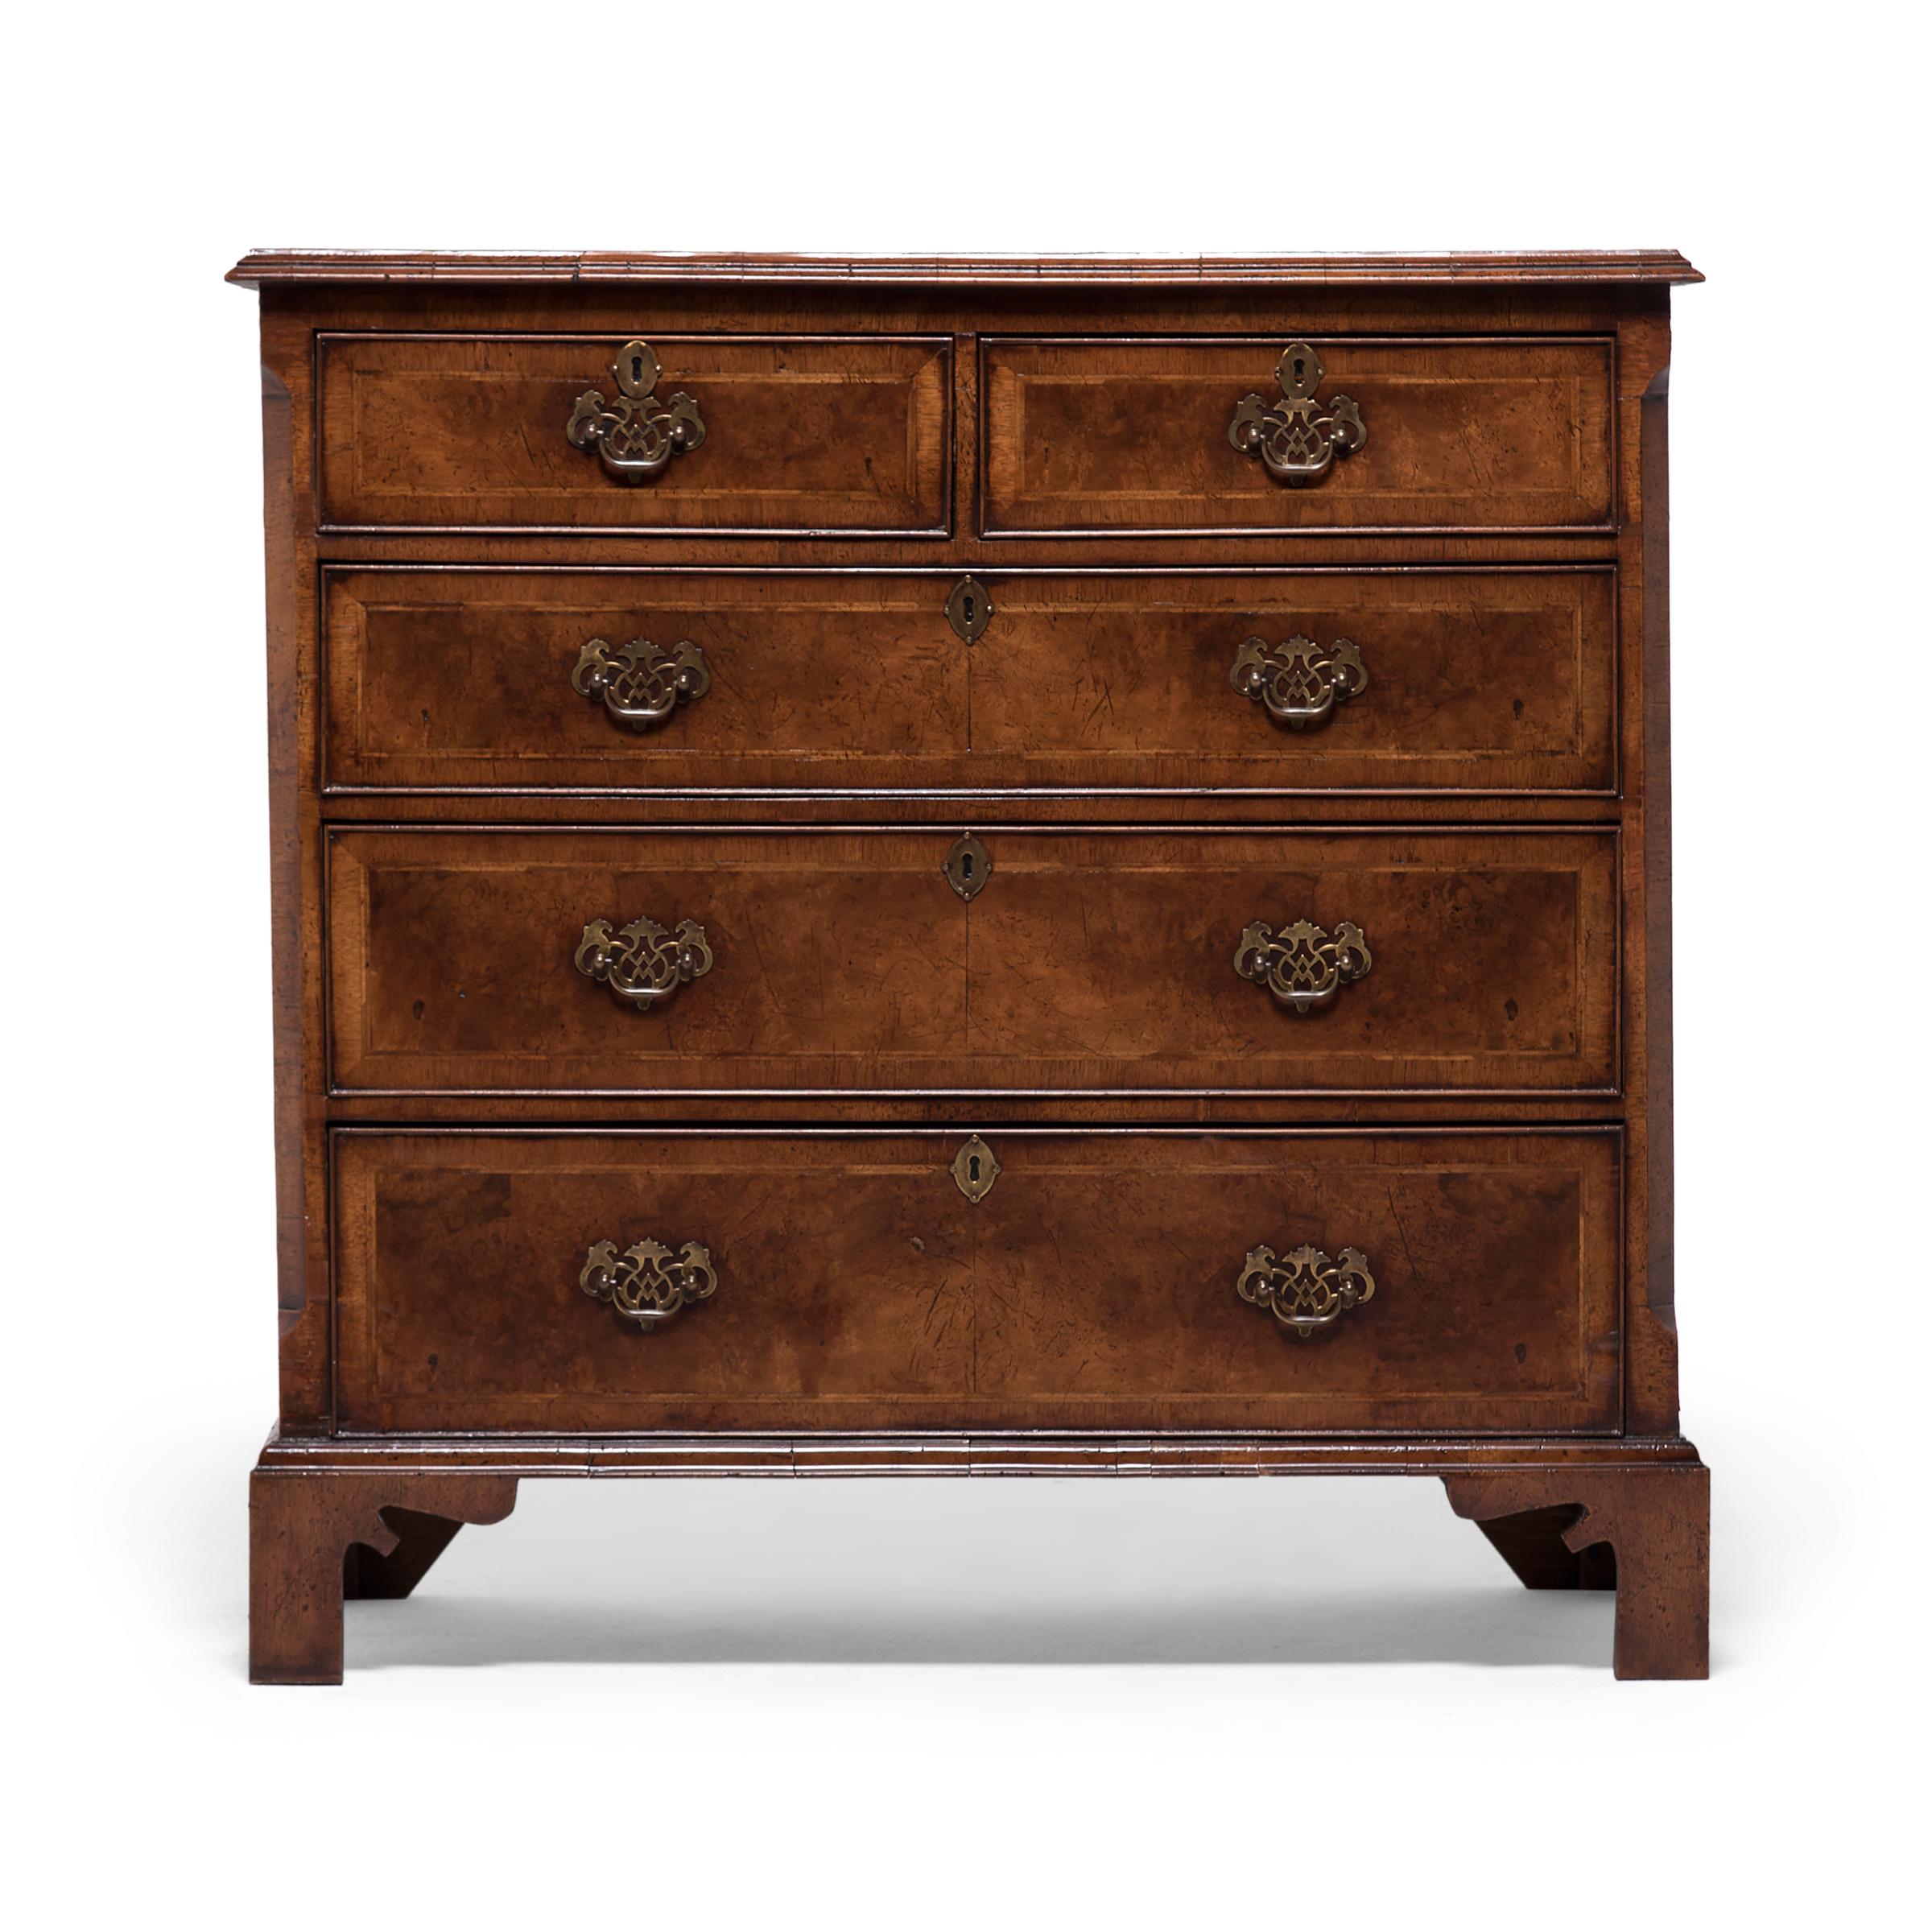 This gorgeous chest of drawers dates to the late-18th century and was crafted in the Queen Anne style with a walnut veneer, bracket feet, and a slightly overhung top. The top is crossbanded with walnut and a thin inset border of contrasting wood.